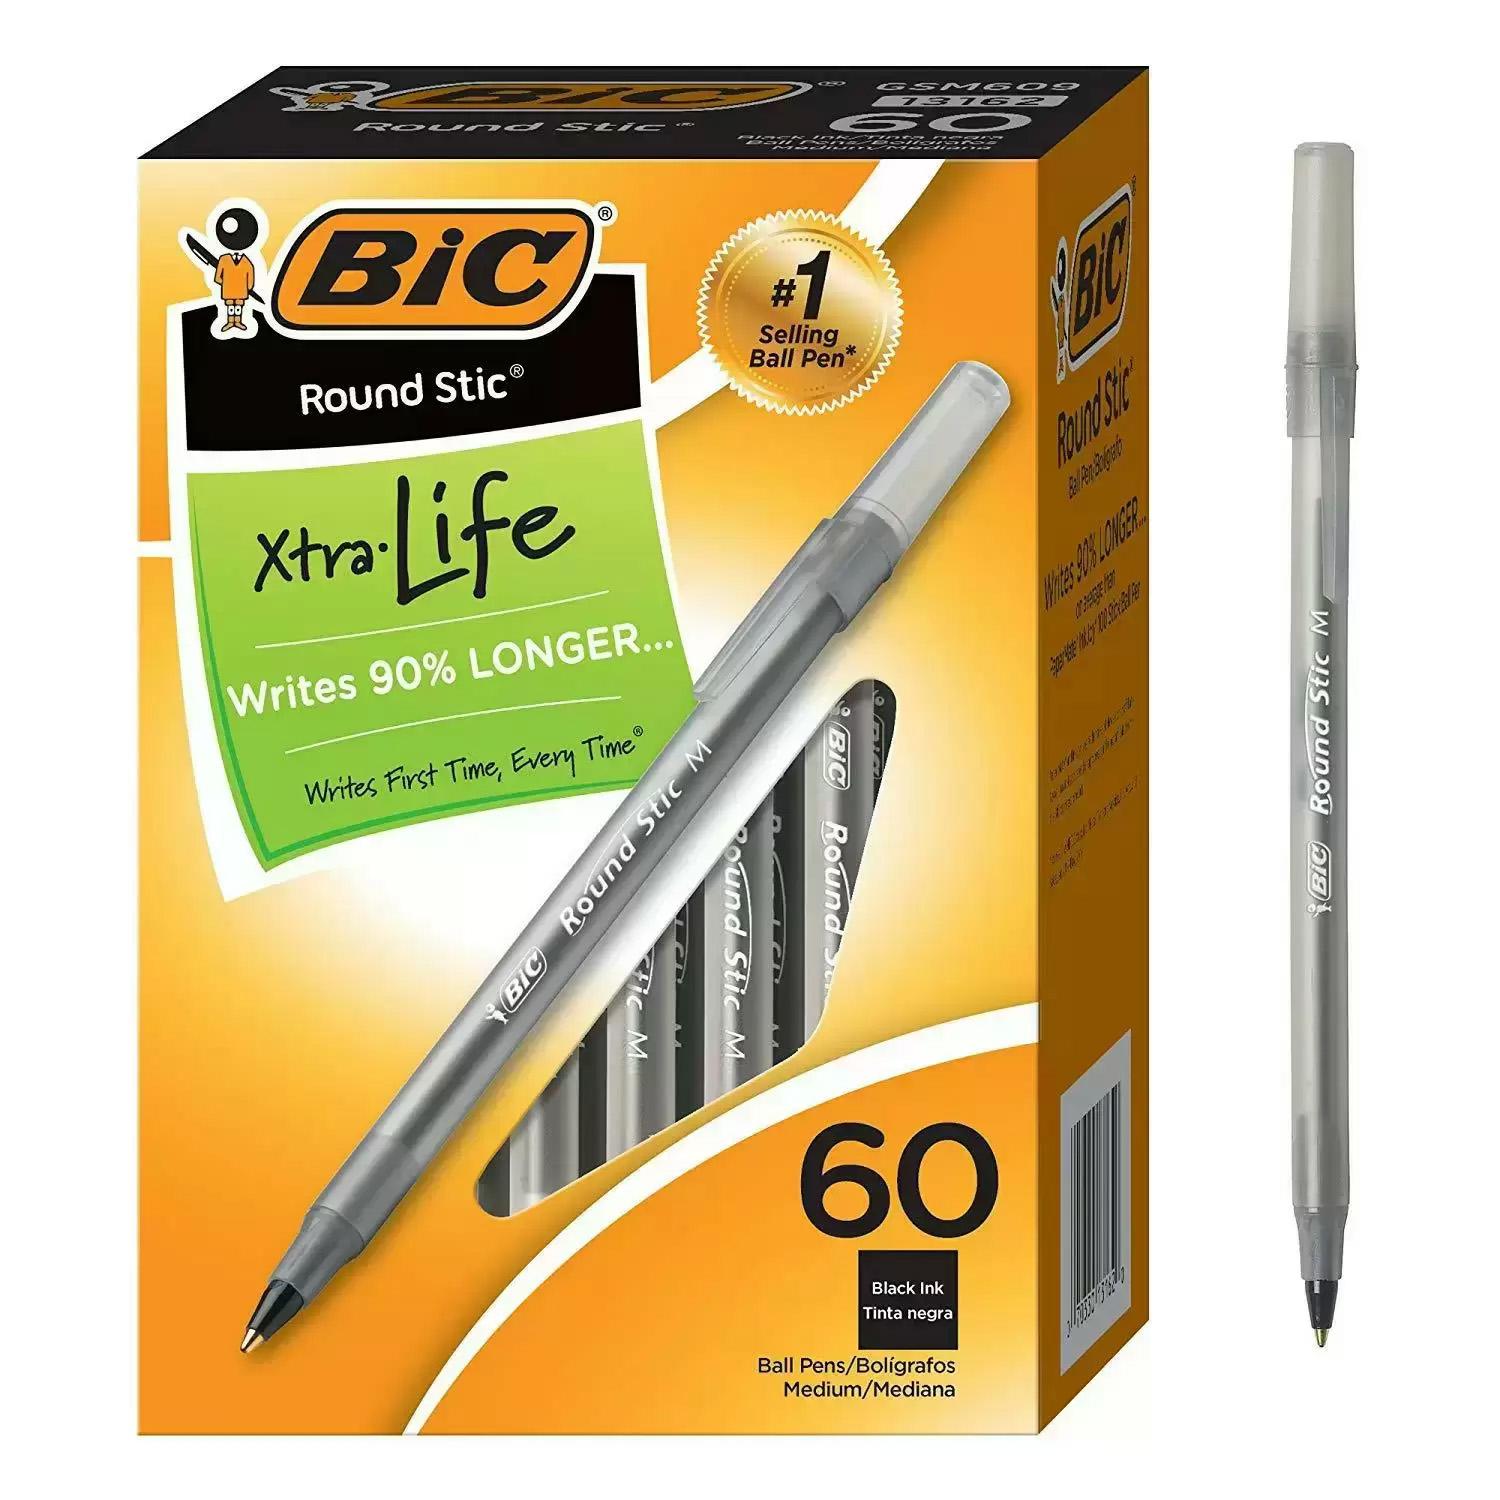 60x BIC Round Stic Xtra Life Ballpoint Pens for $3.23